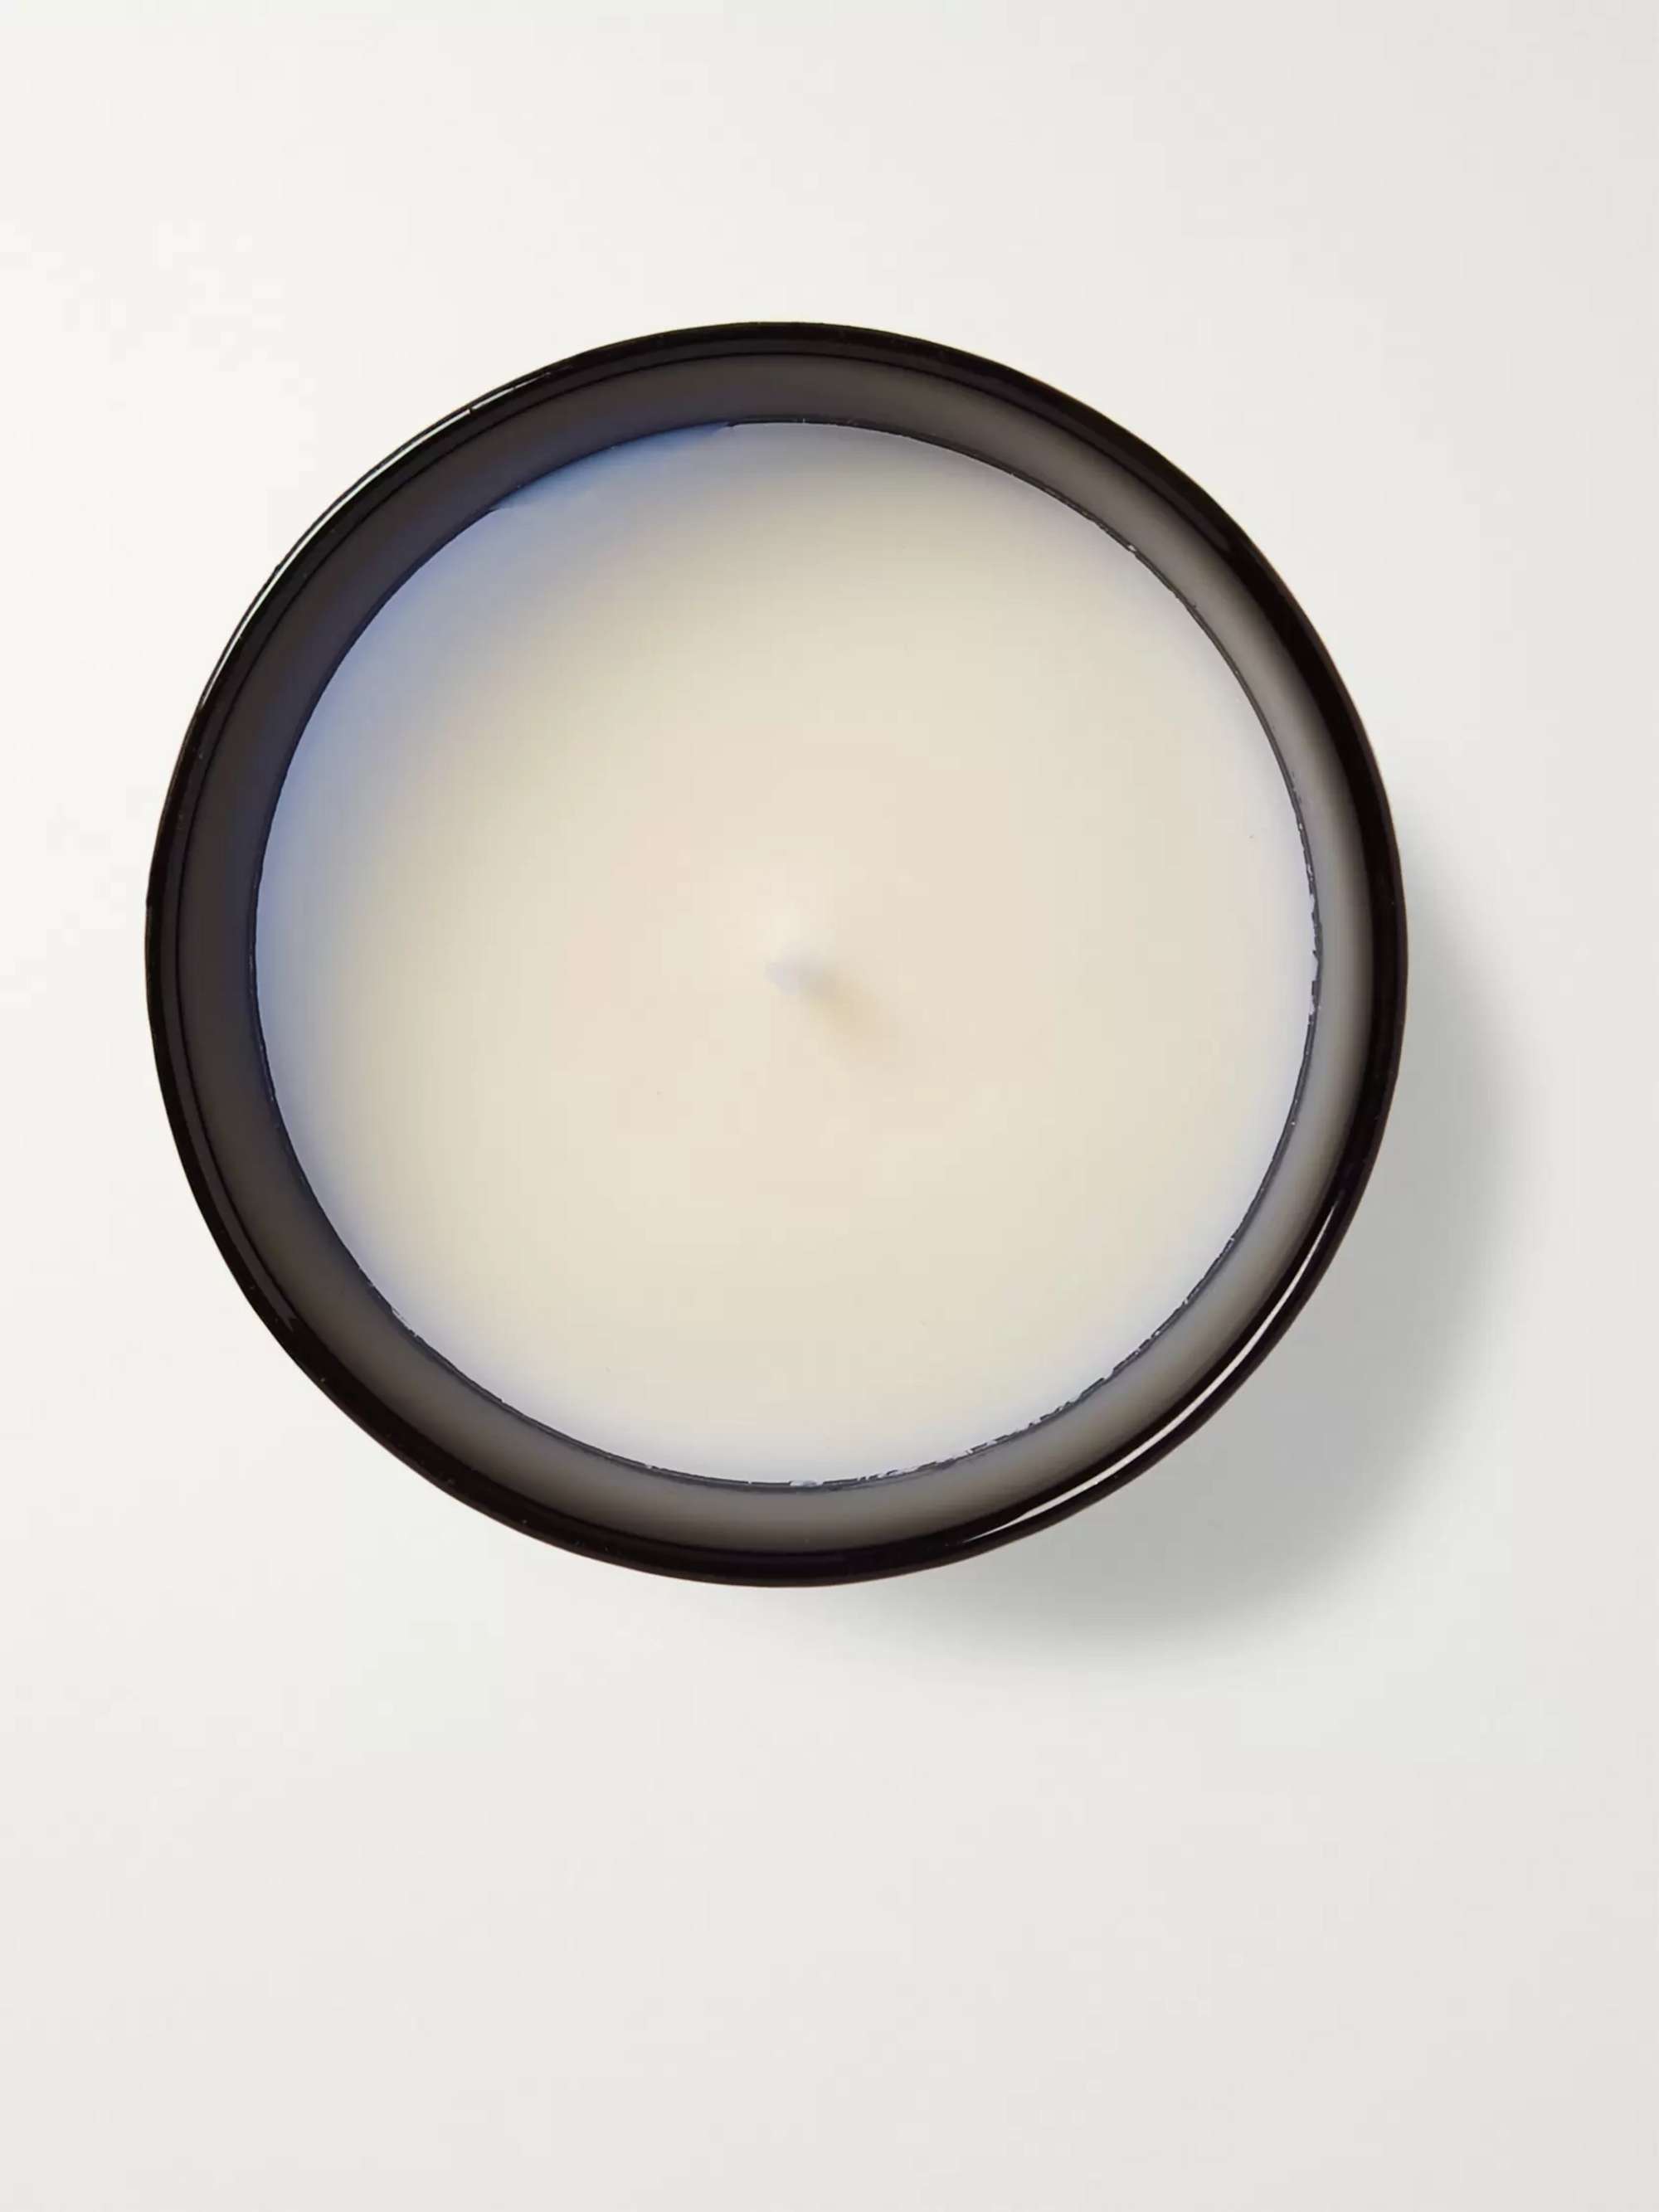 TRUDON Maduraï Scented Candle, 270g